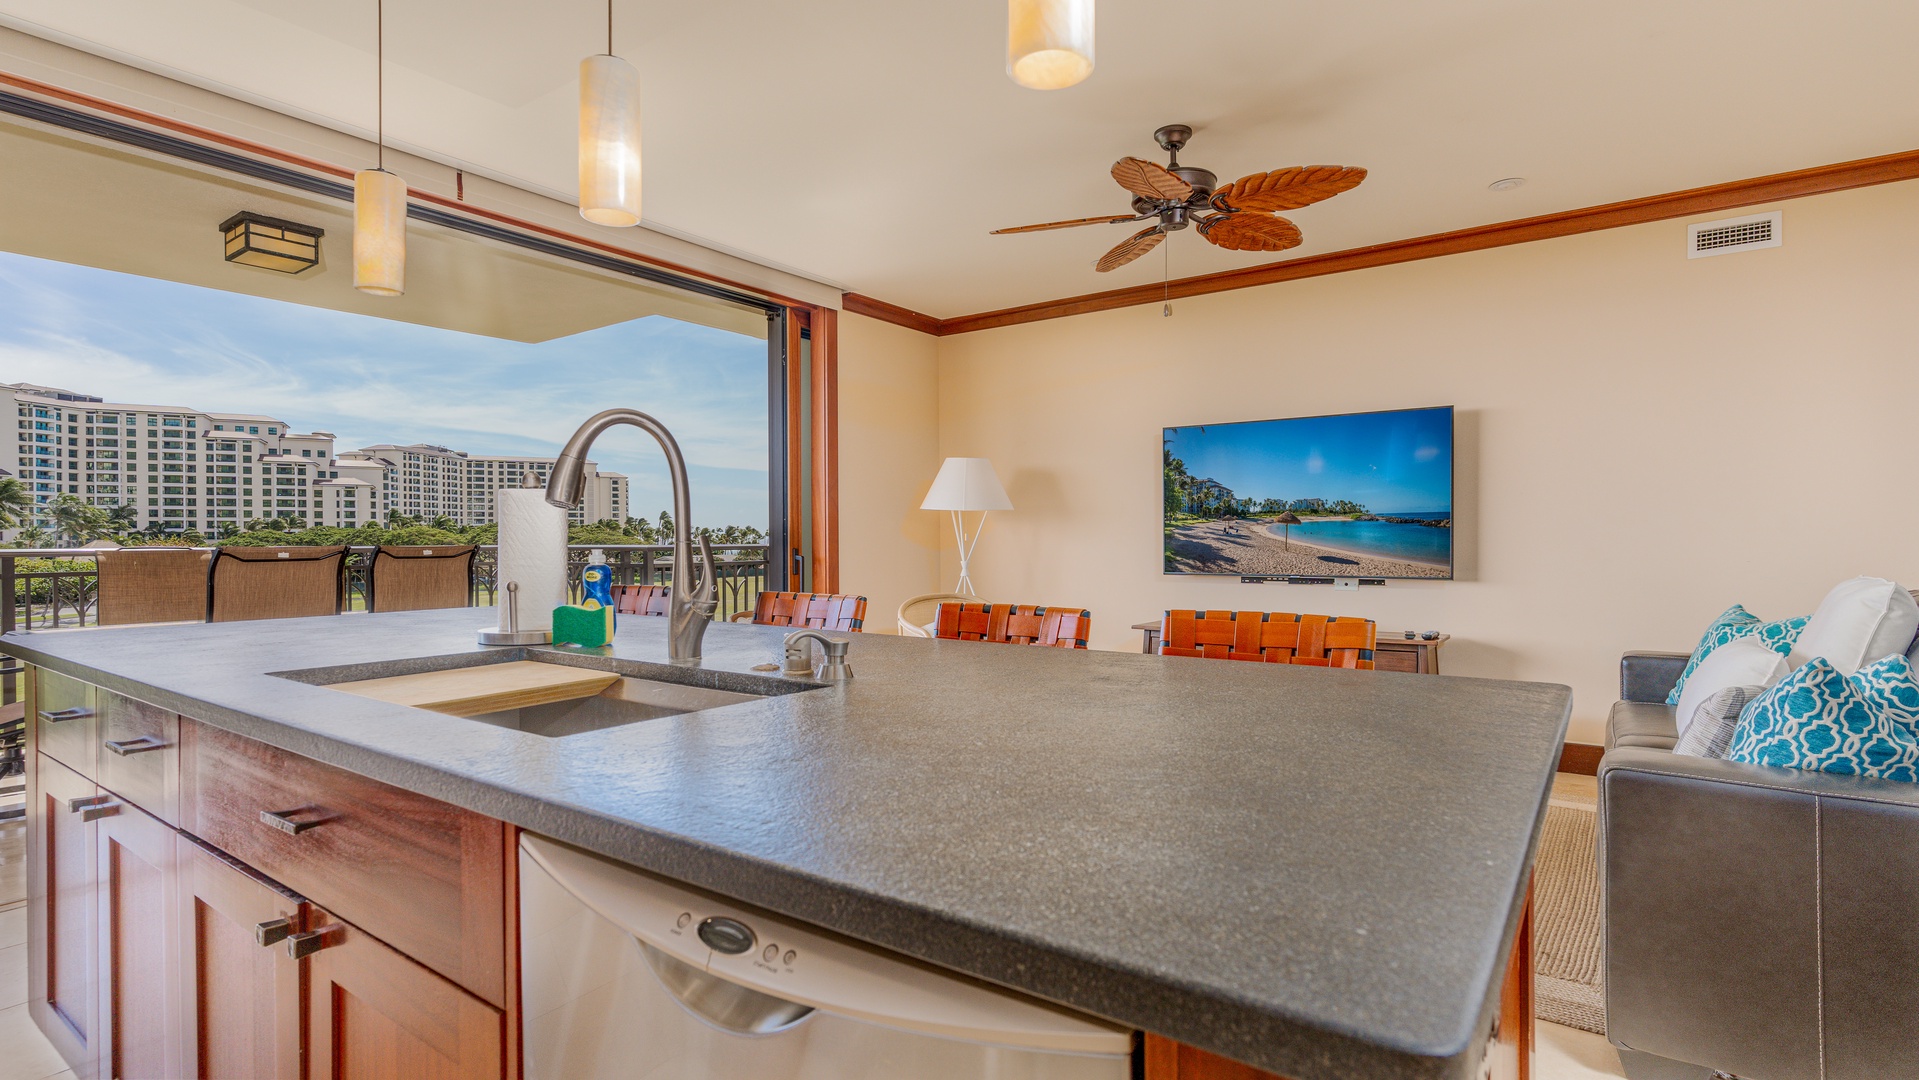 Kapolei Vacation Rentals, Ko Olina Beach Villas O425 - The best views for the chef of the house and TV for entertaining.